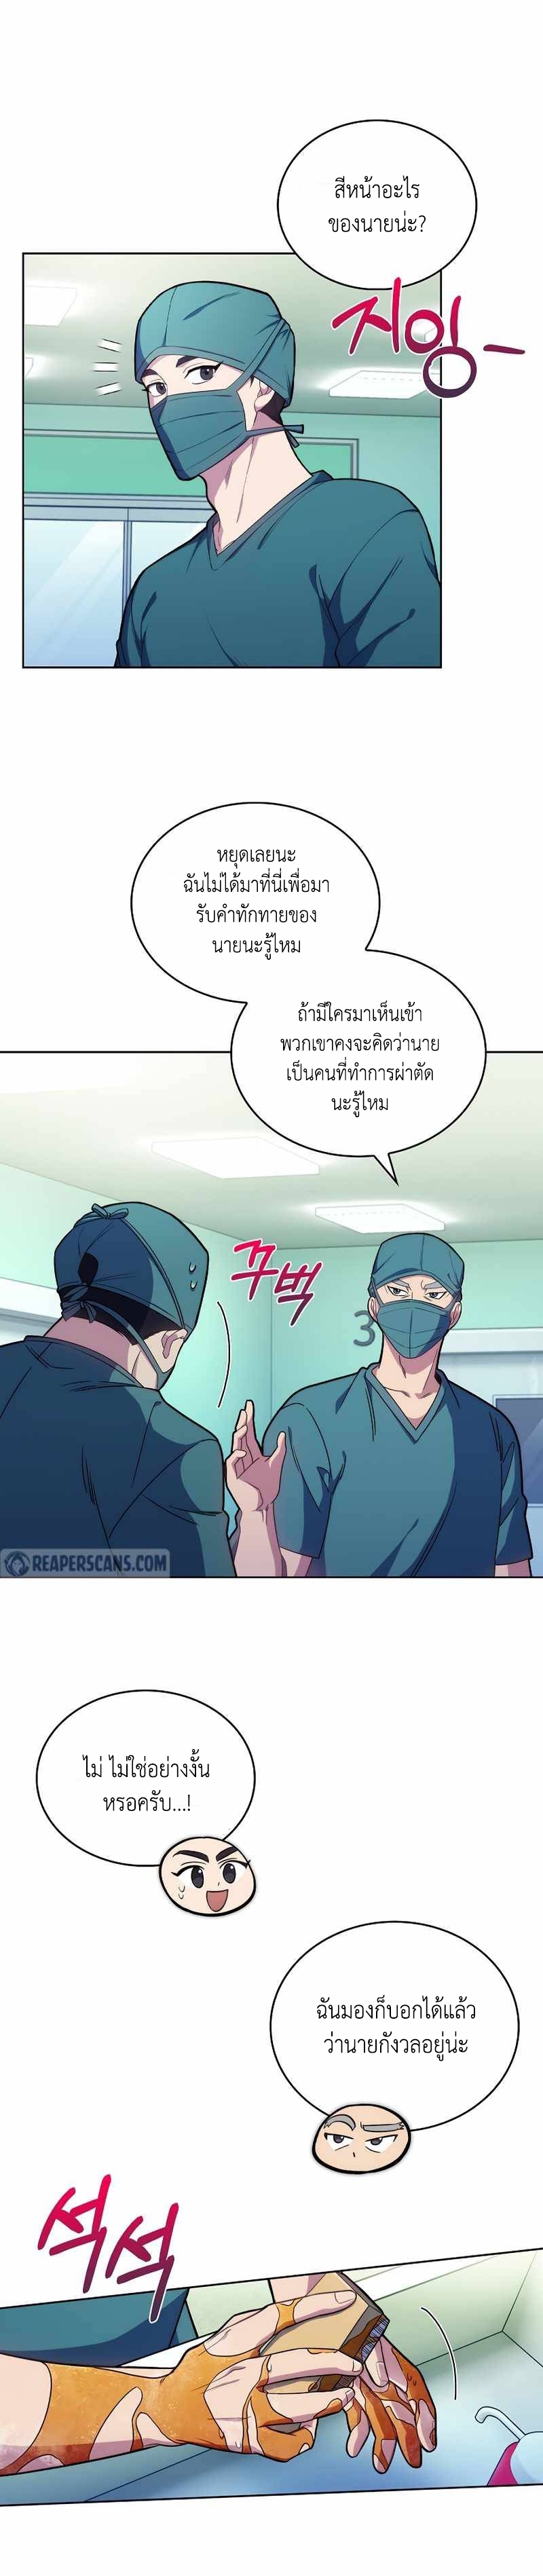 Level Up Doctor 12 (8)